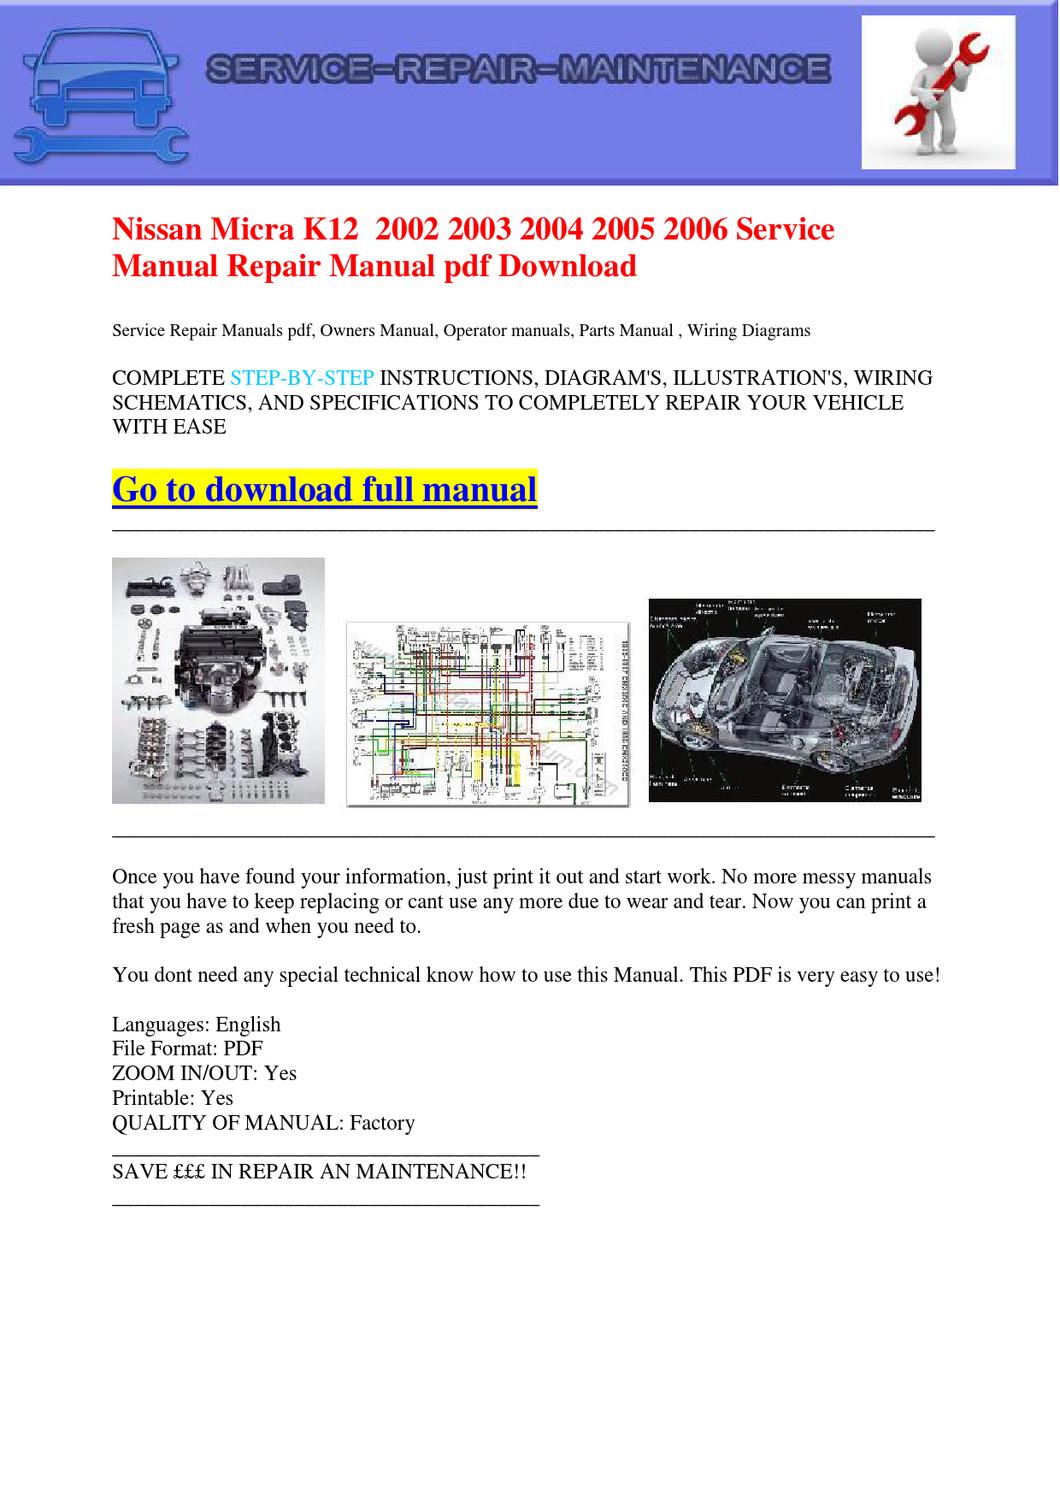 Nissan micra 2003 owners manual download